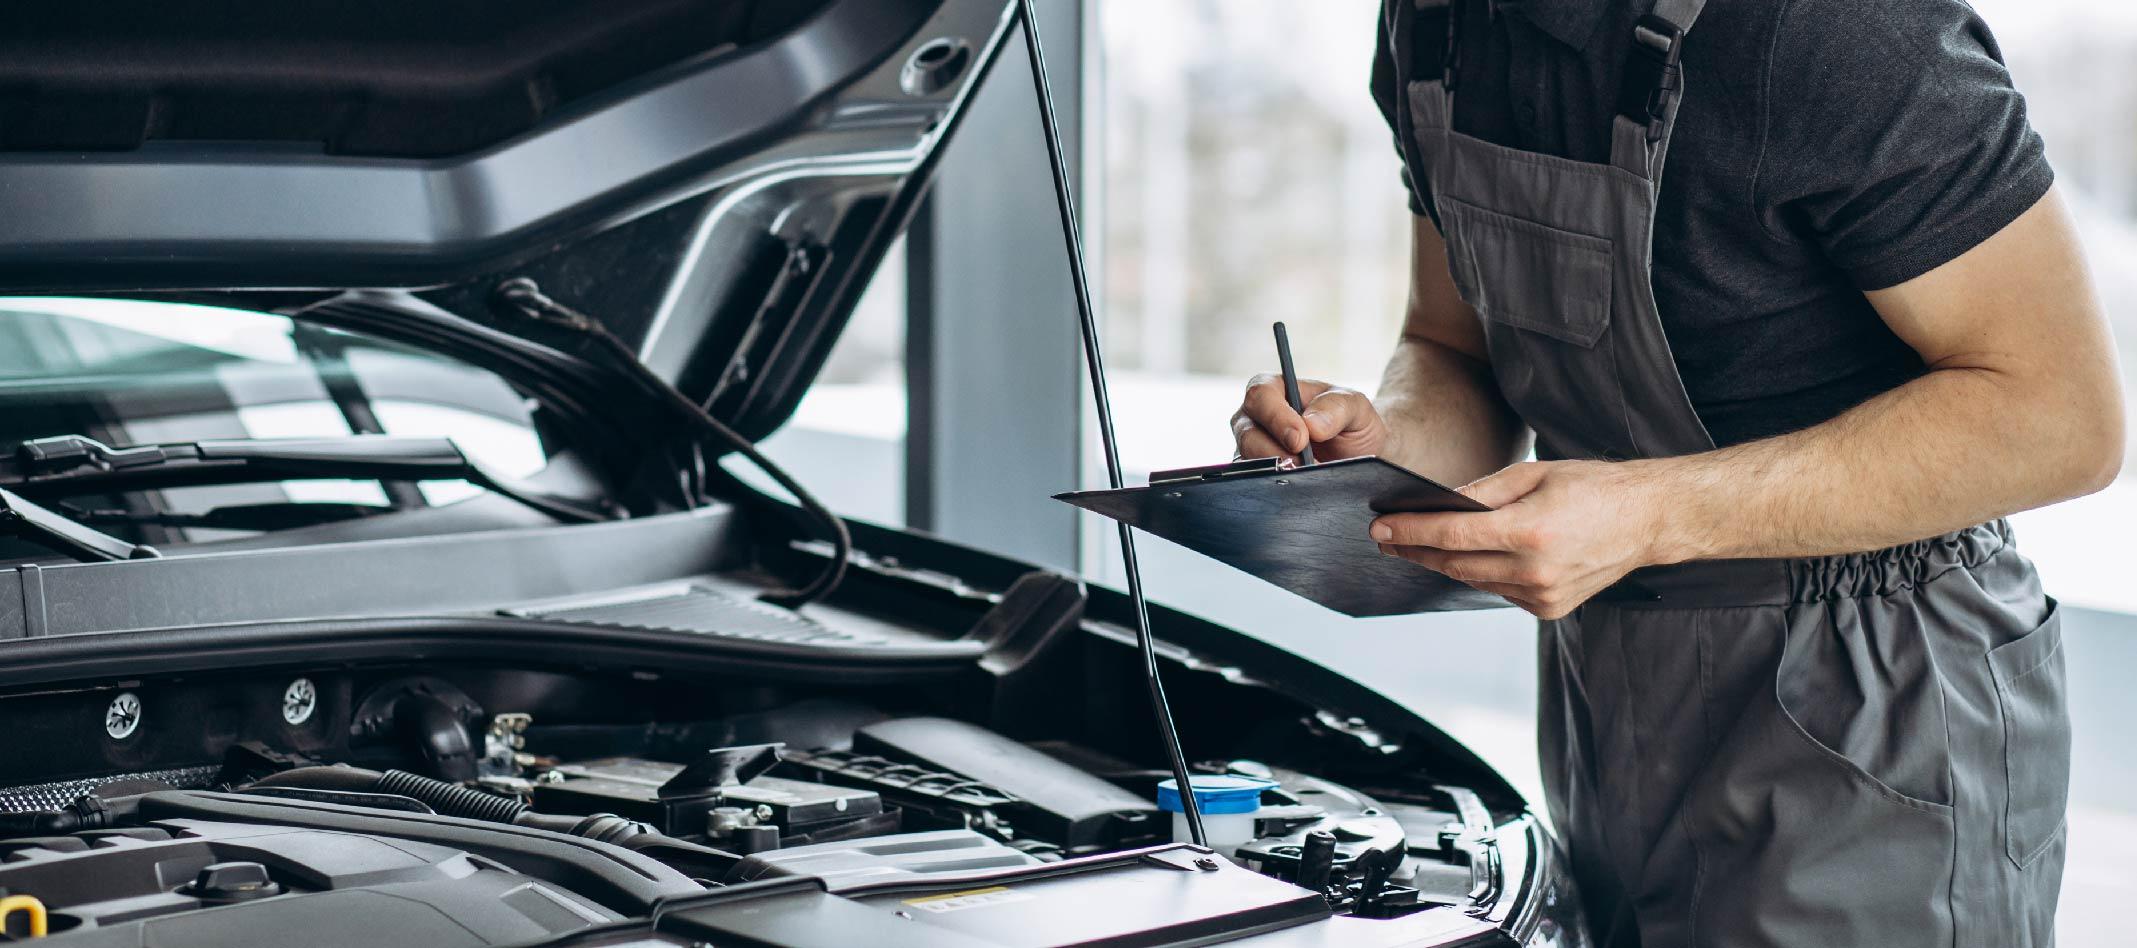 How to check your vehicle’s MOT status